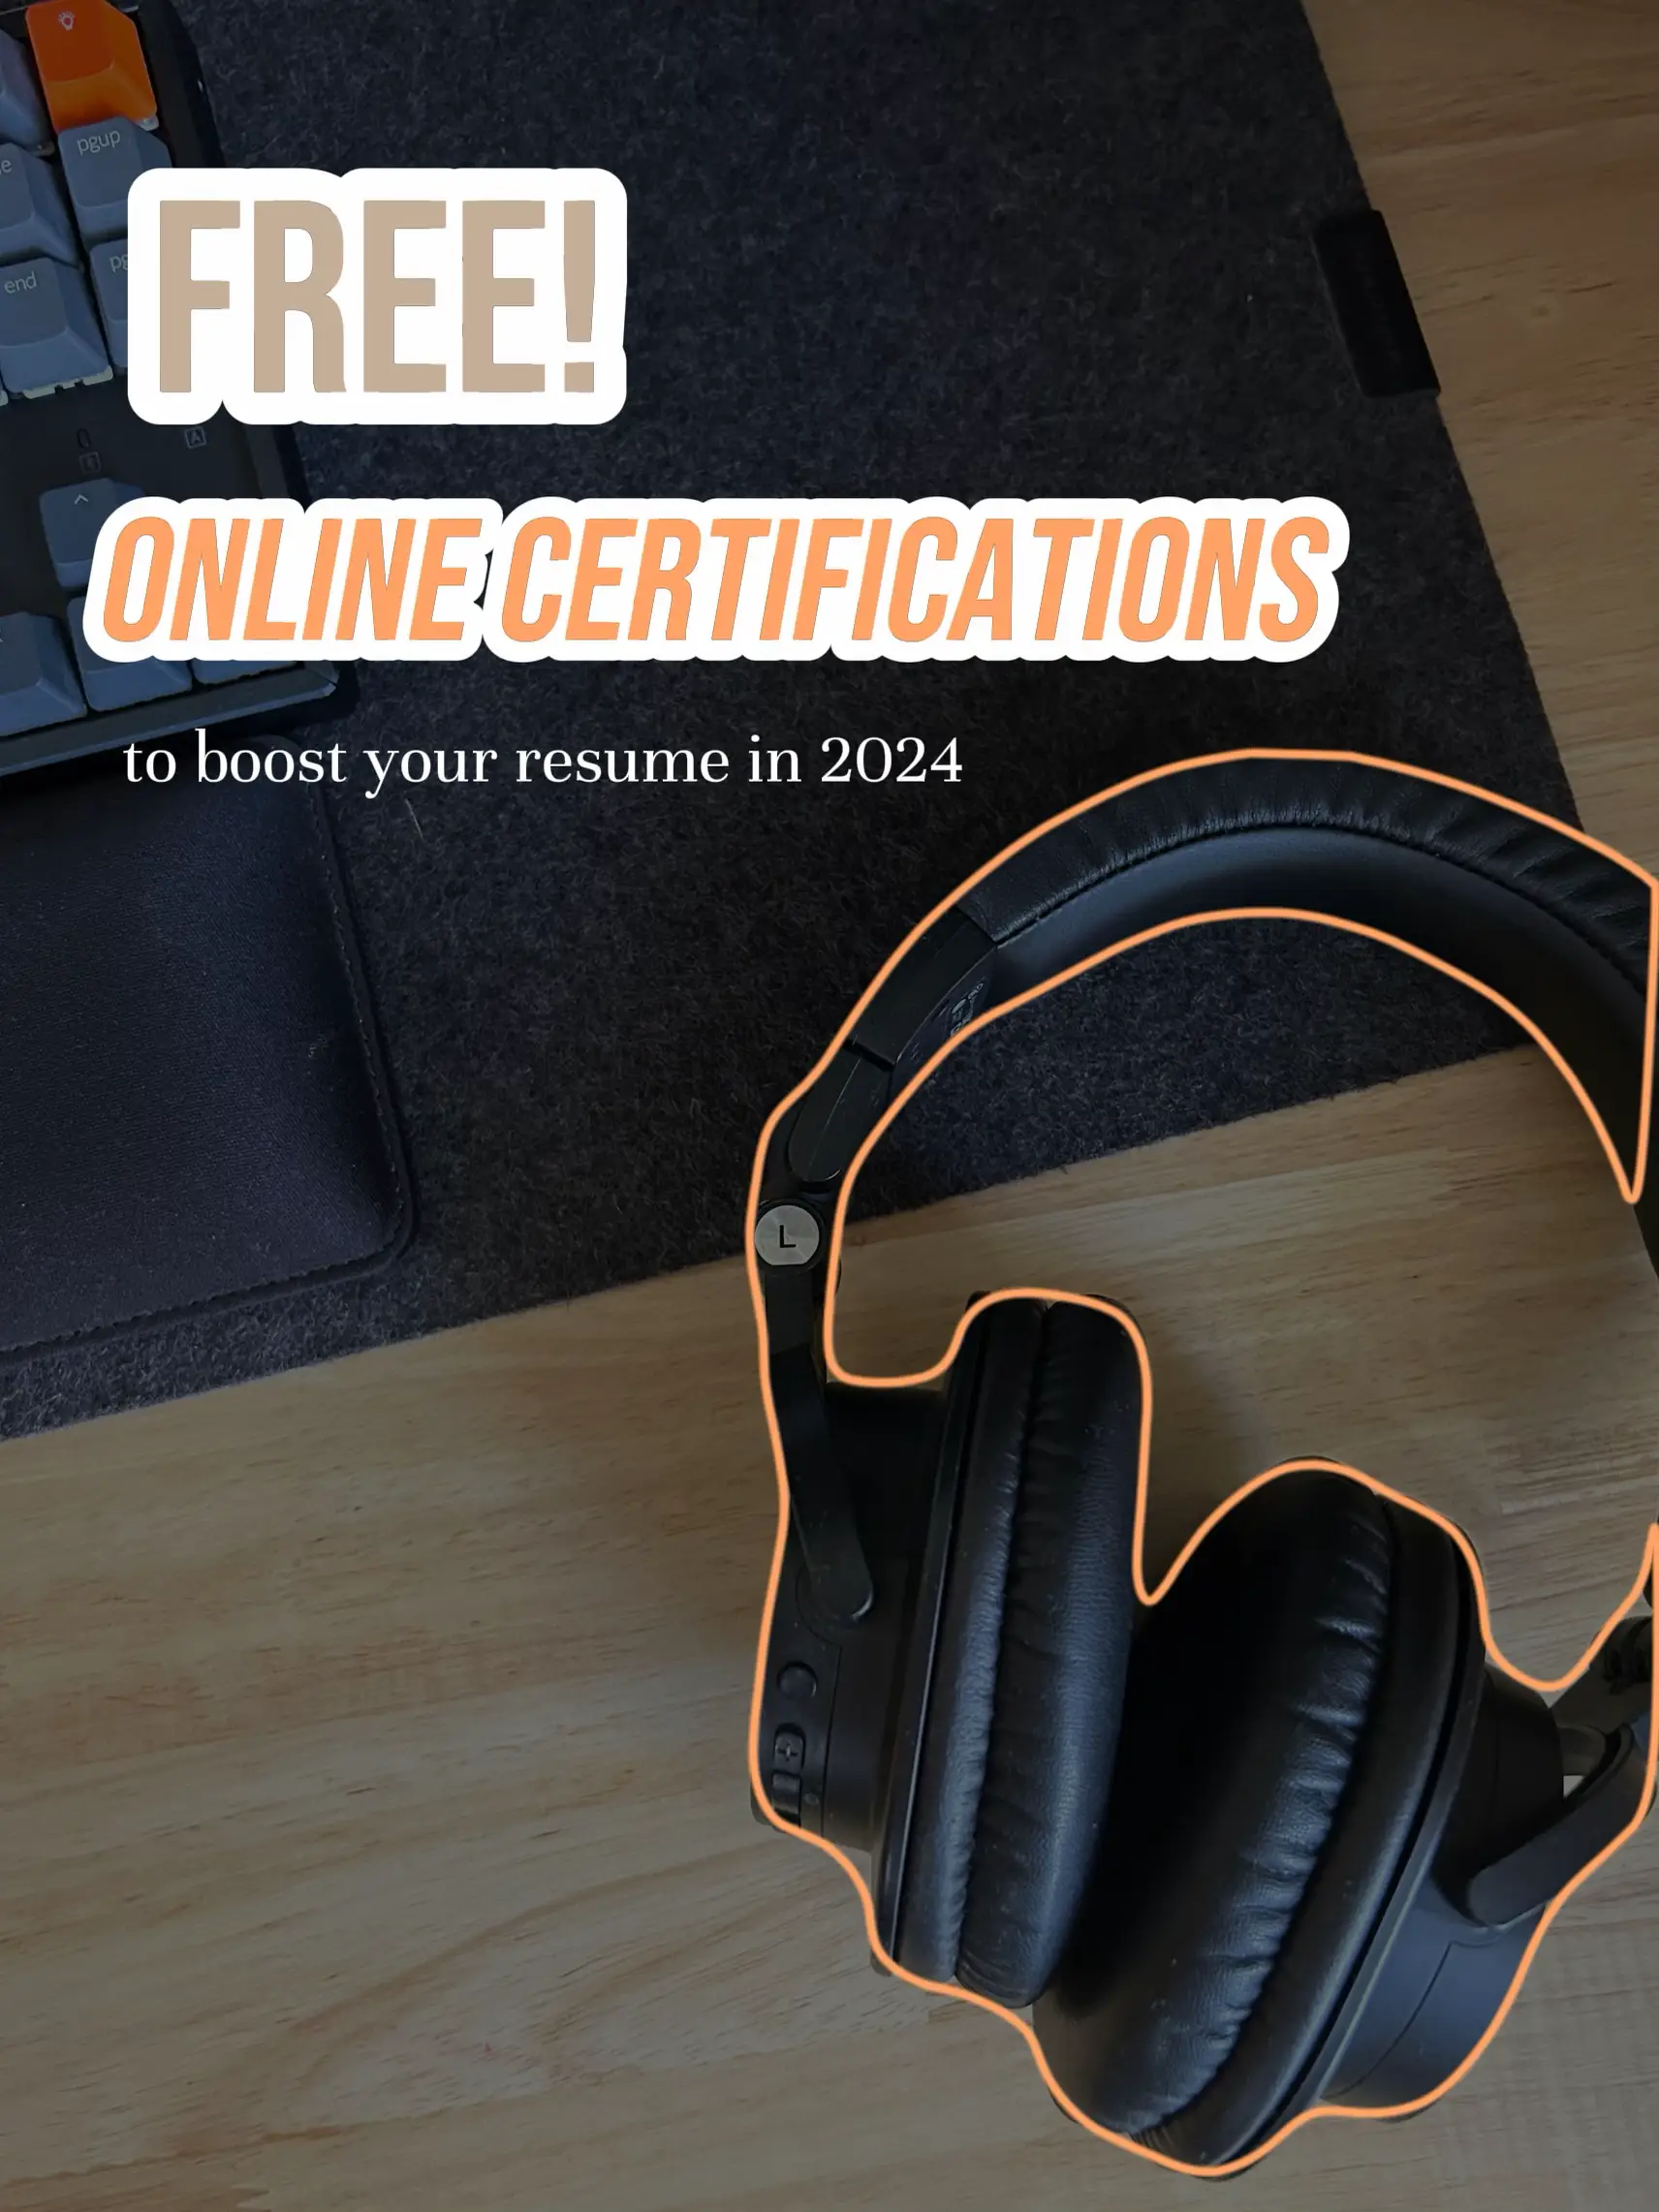 FREE Online Certifications 2024 💻 's images